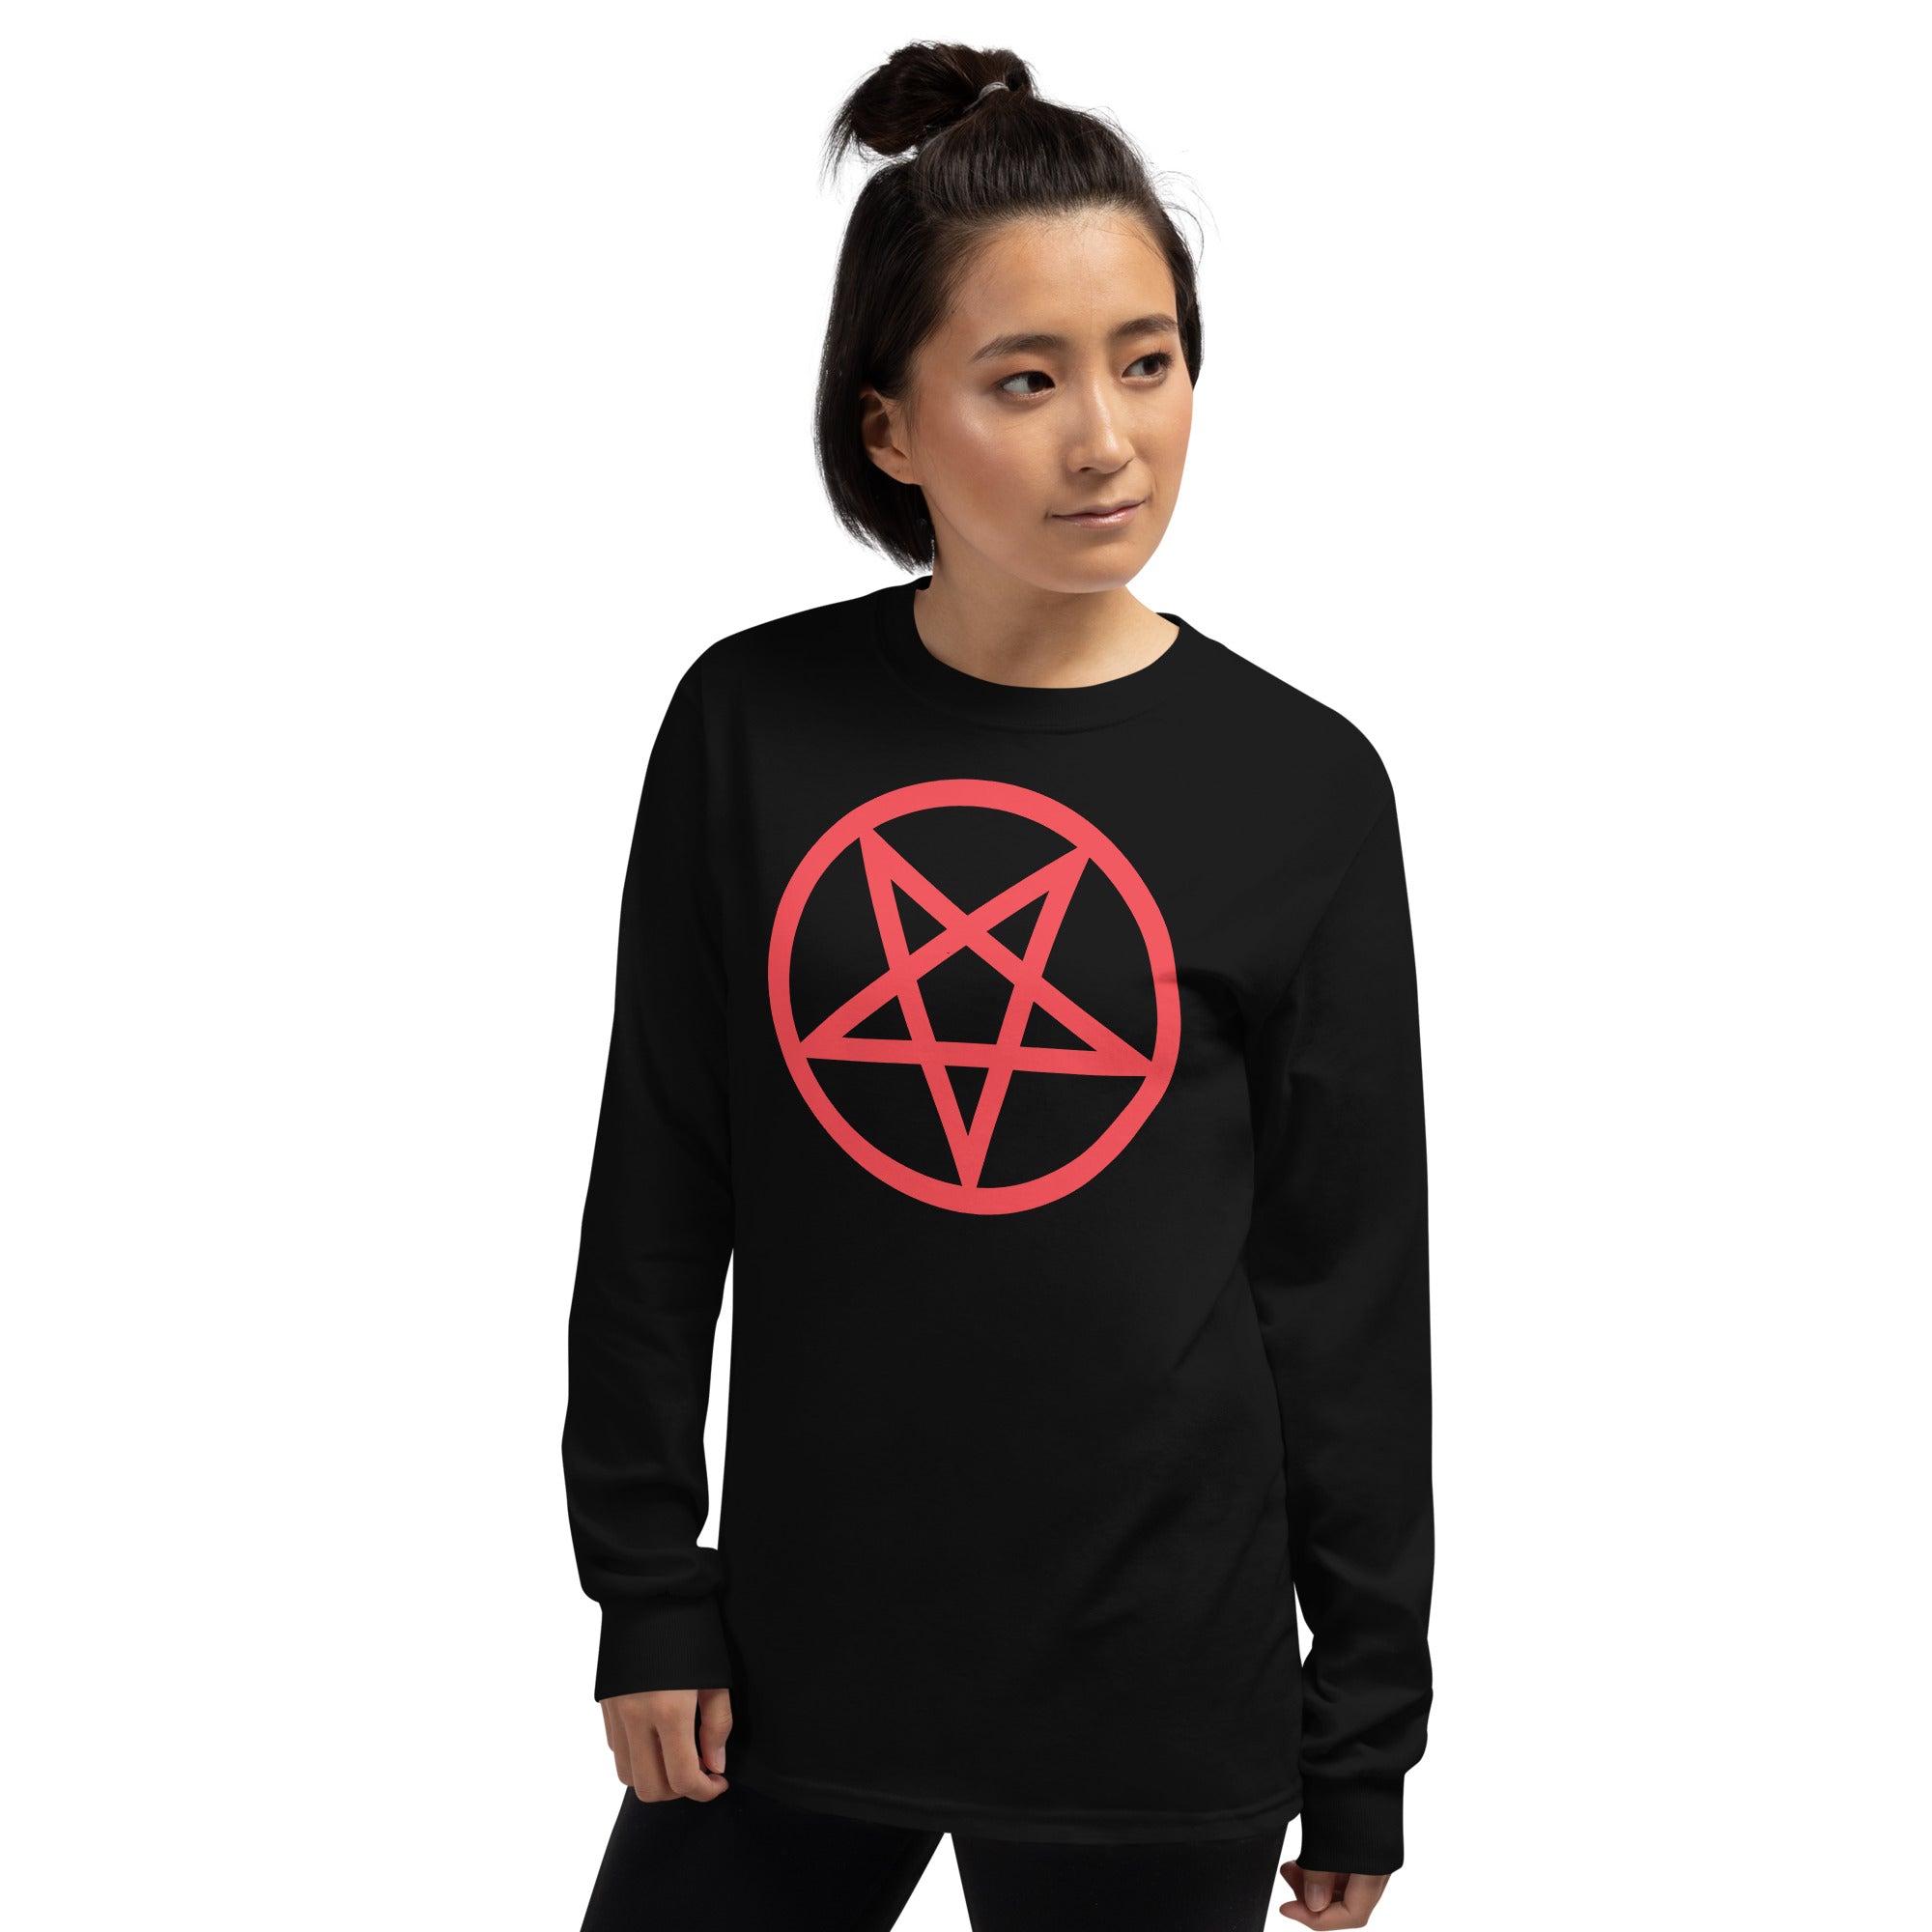 Red Classic Inverted Pentagram Occult Symbol Long Sleeve Shirt - Edge of Life Designs